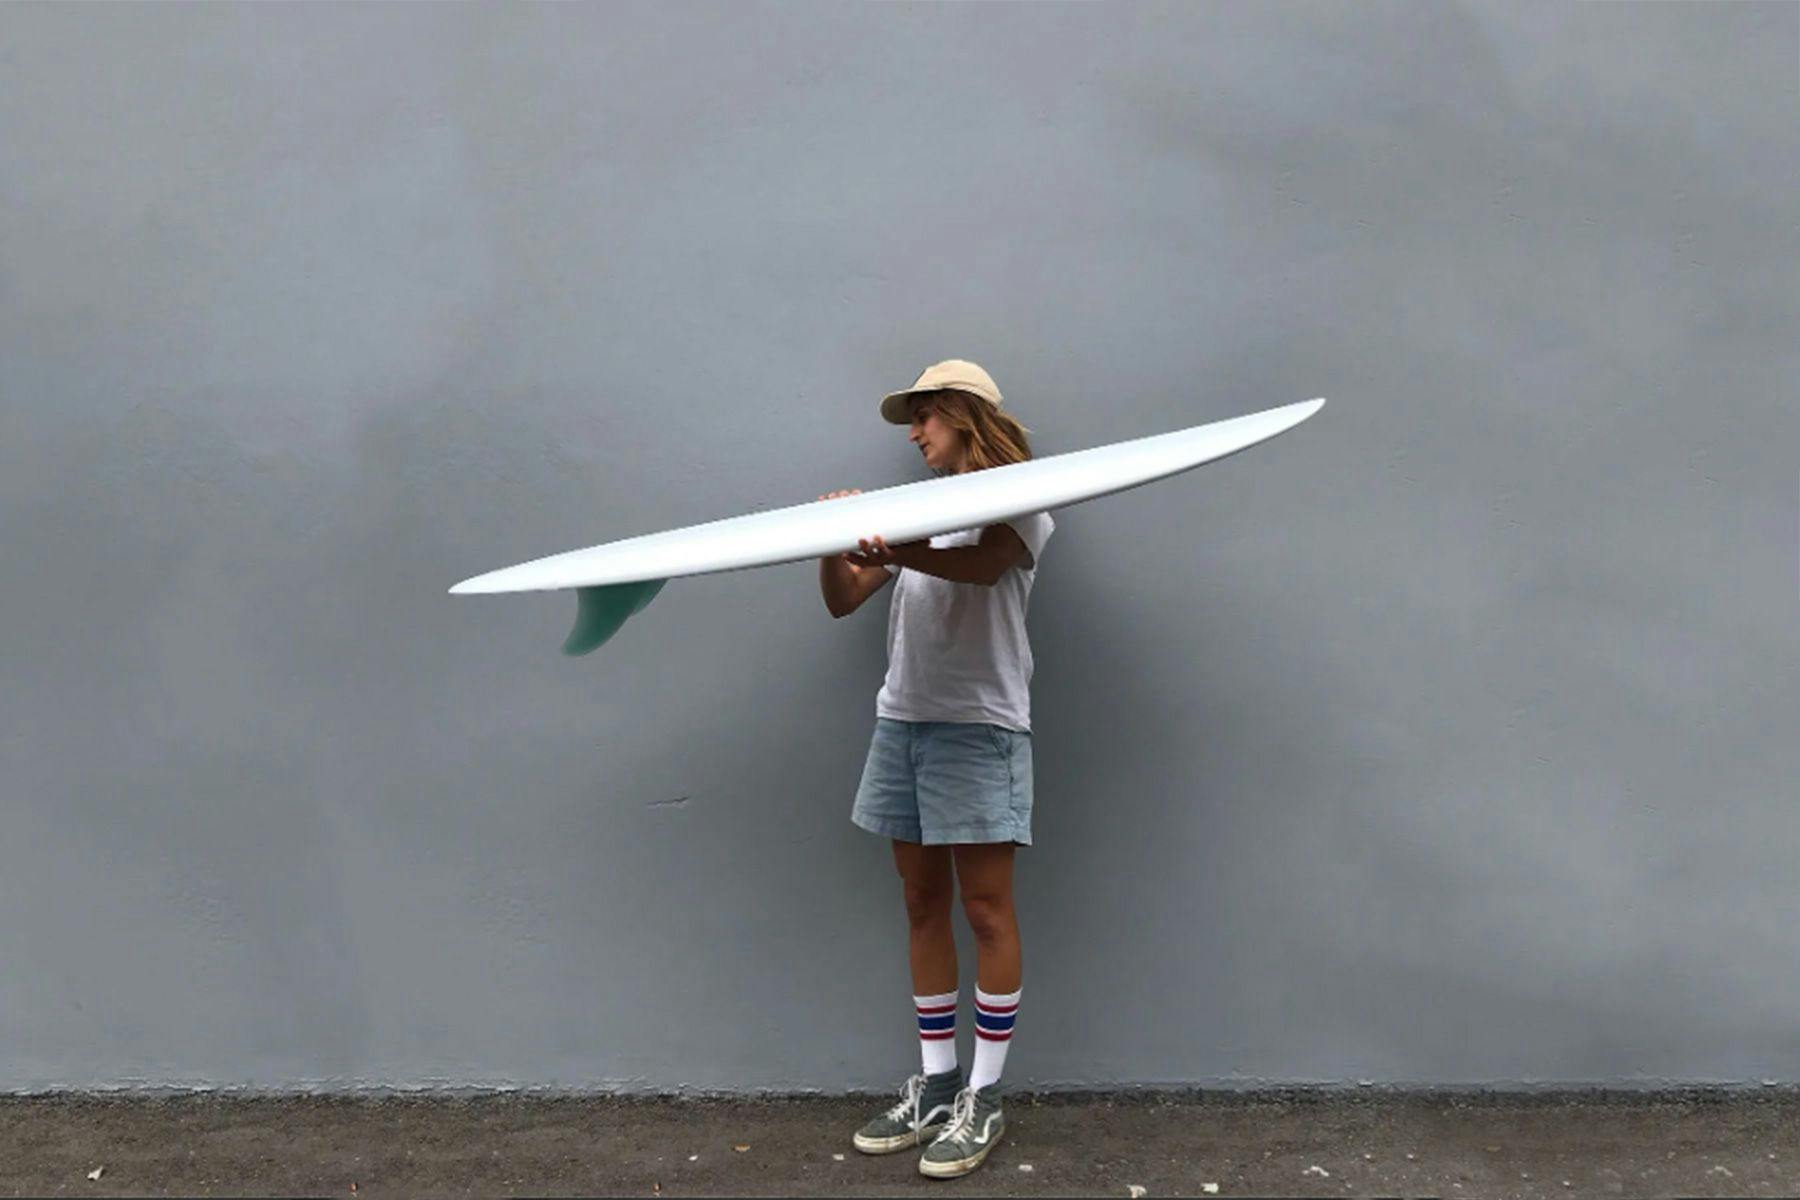 surfboard shaper Christine Brailsford Caroof furrow surfcraft holding up a finished surfboard